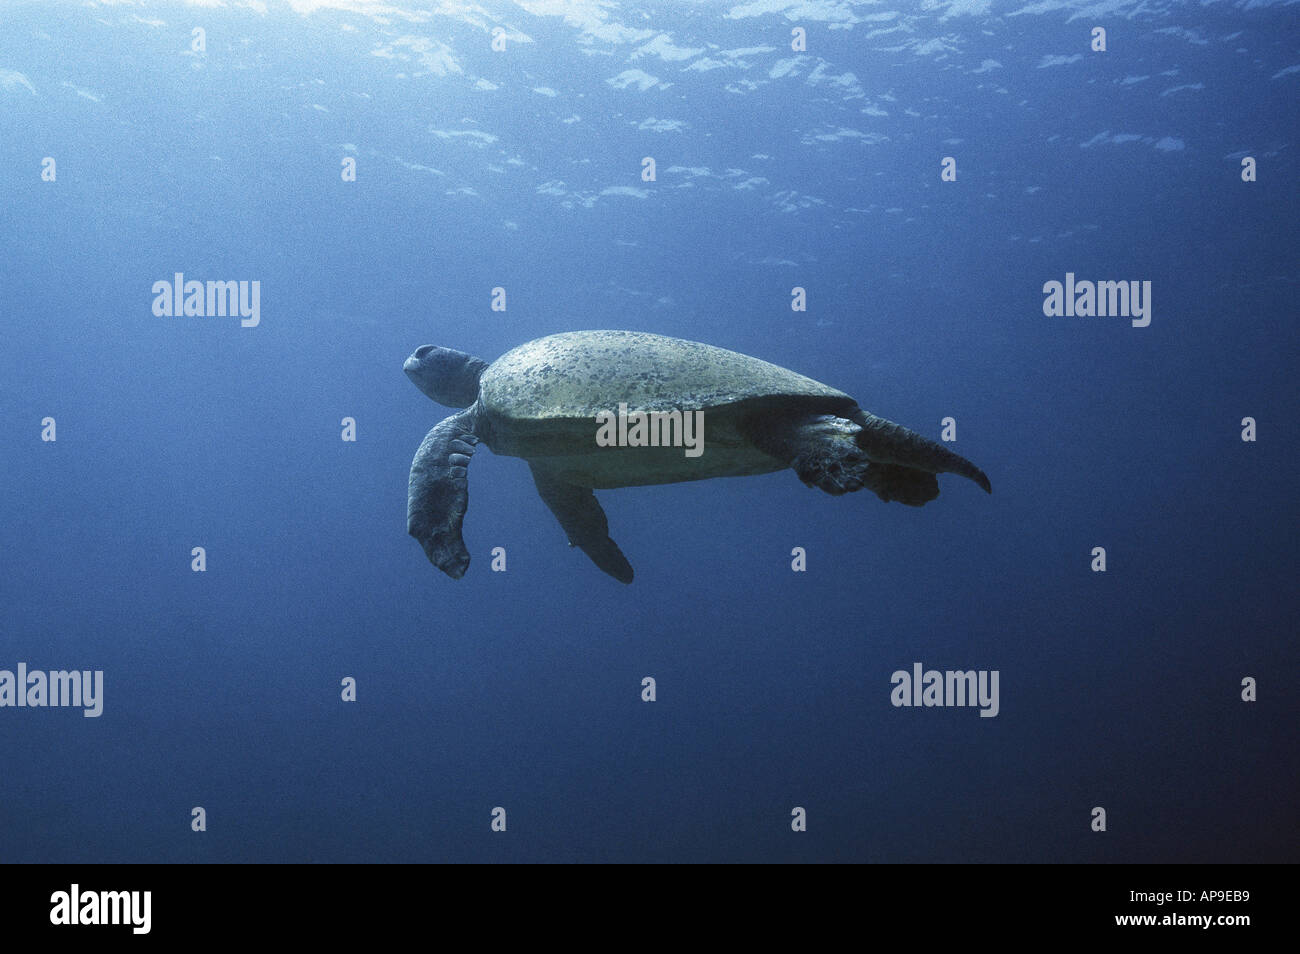 Green turtle swimming in open water Stock Photo